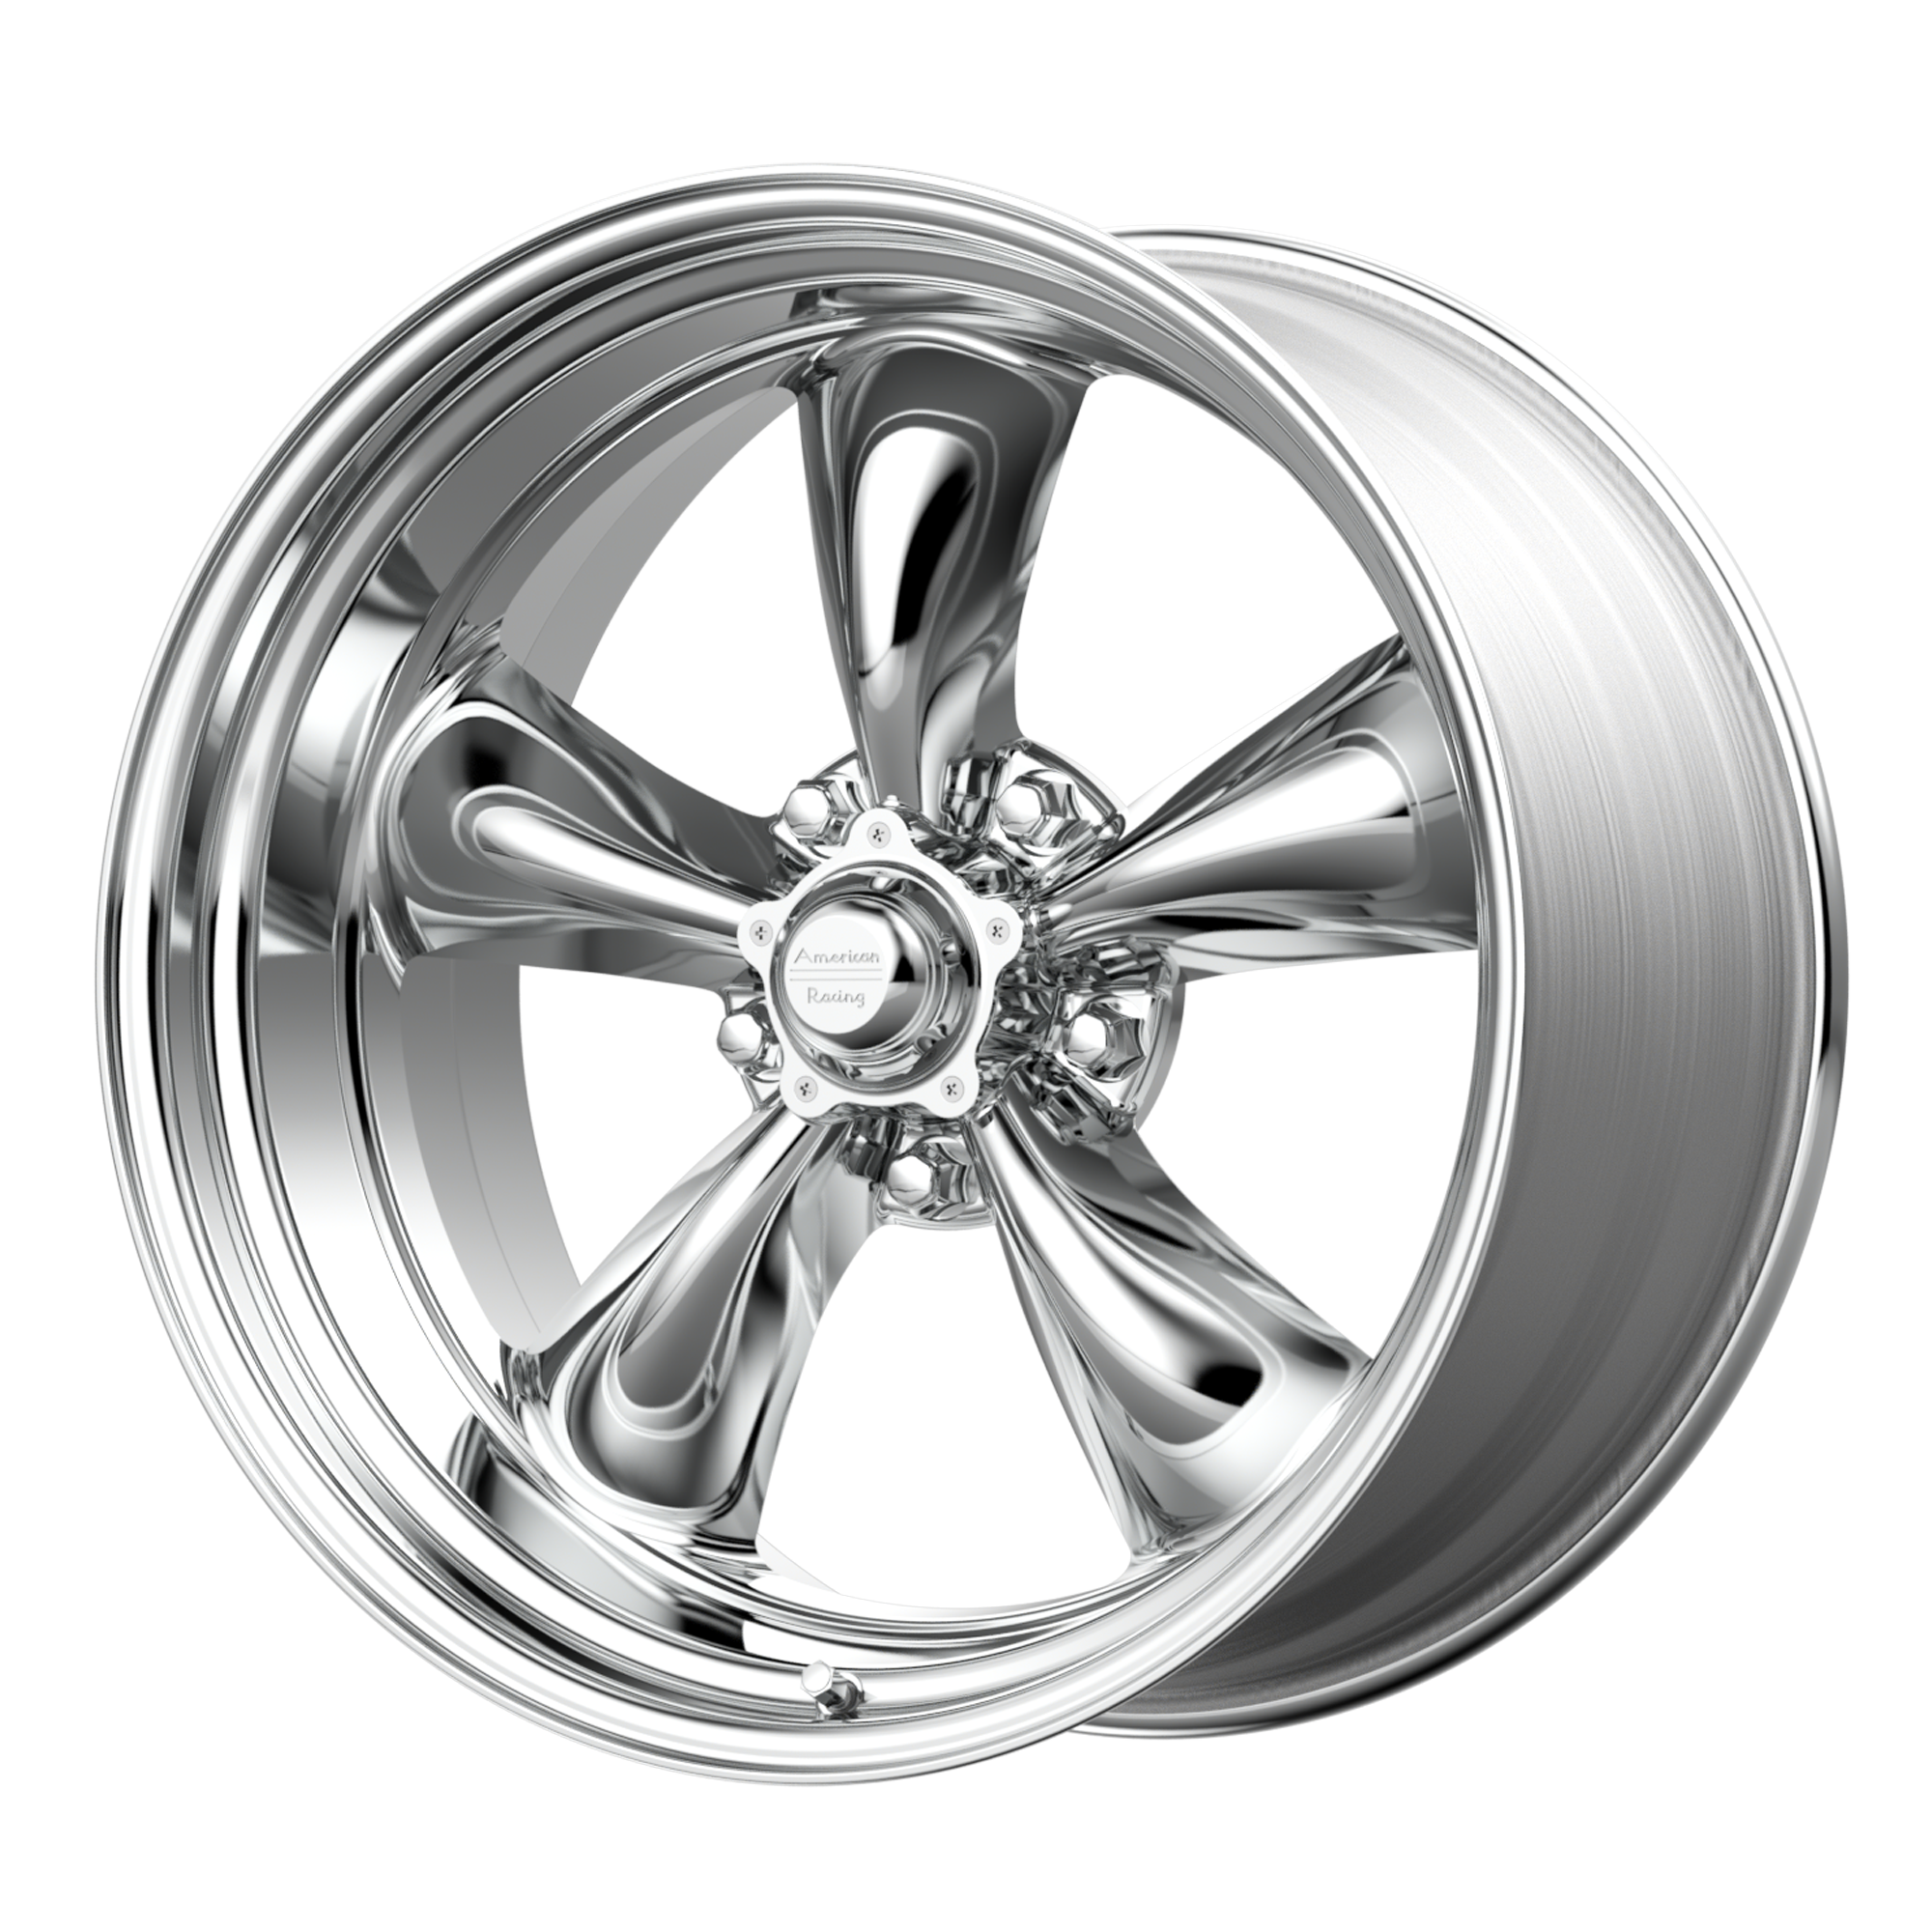 TORQ THRUST II 1 PC 17x9.5 5x120.65 POLISHED (32 mm) - Tires and Engine Performance